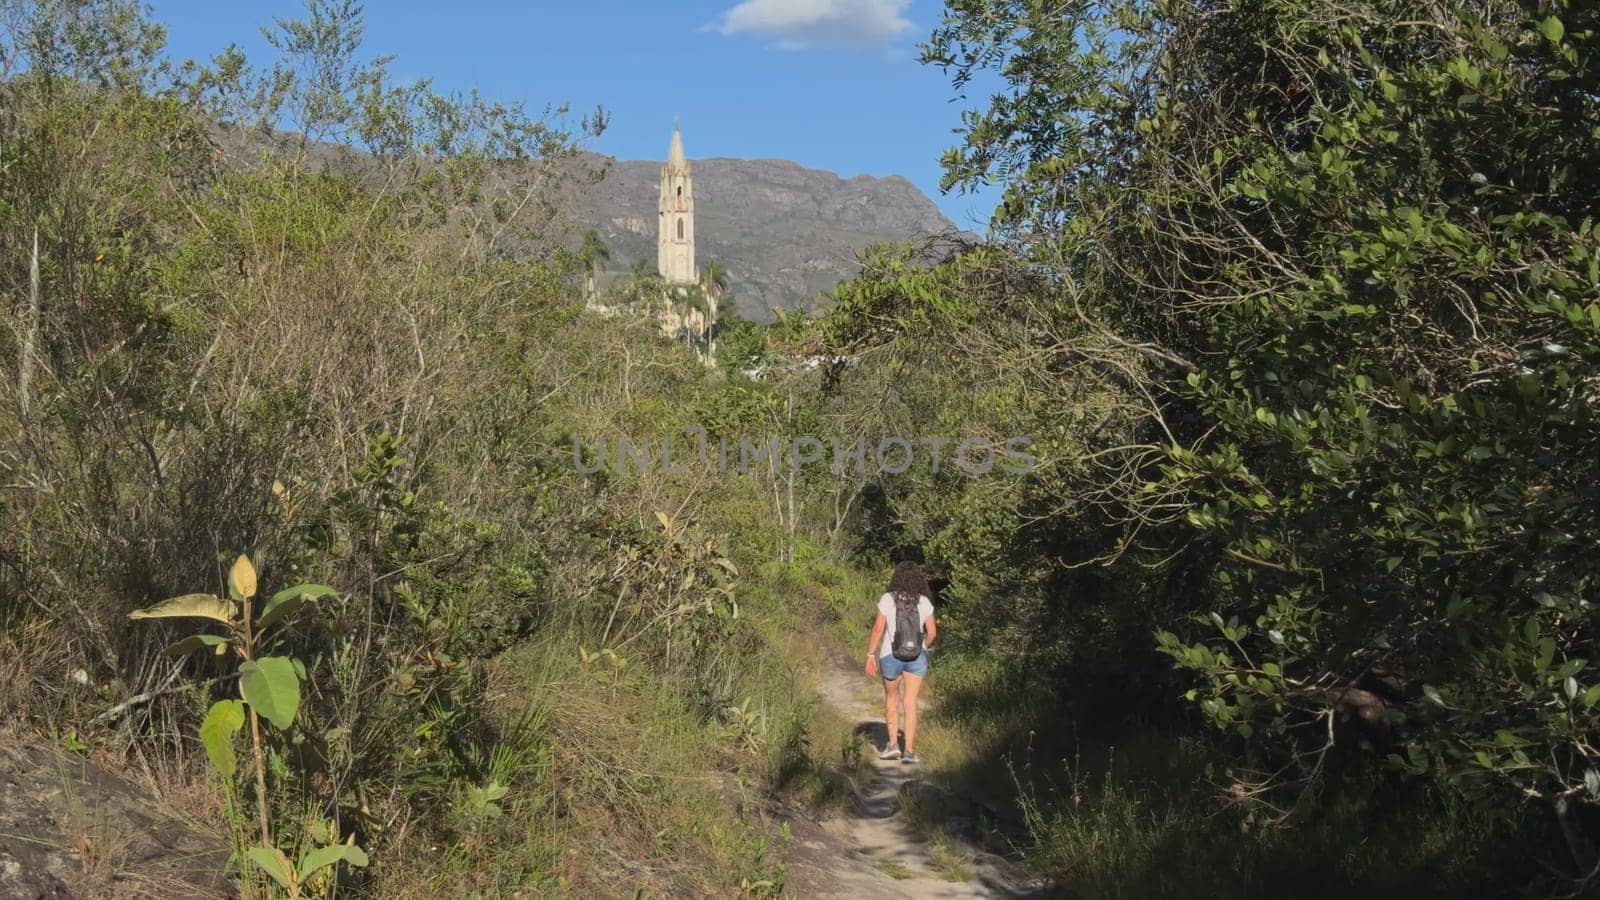 Hiker treks on forest path, church spire visible far.